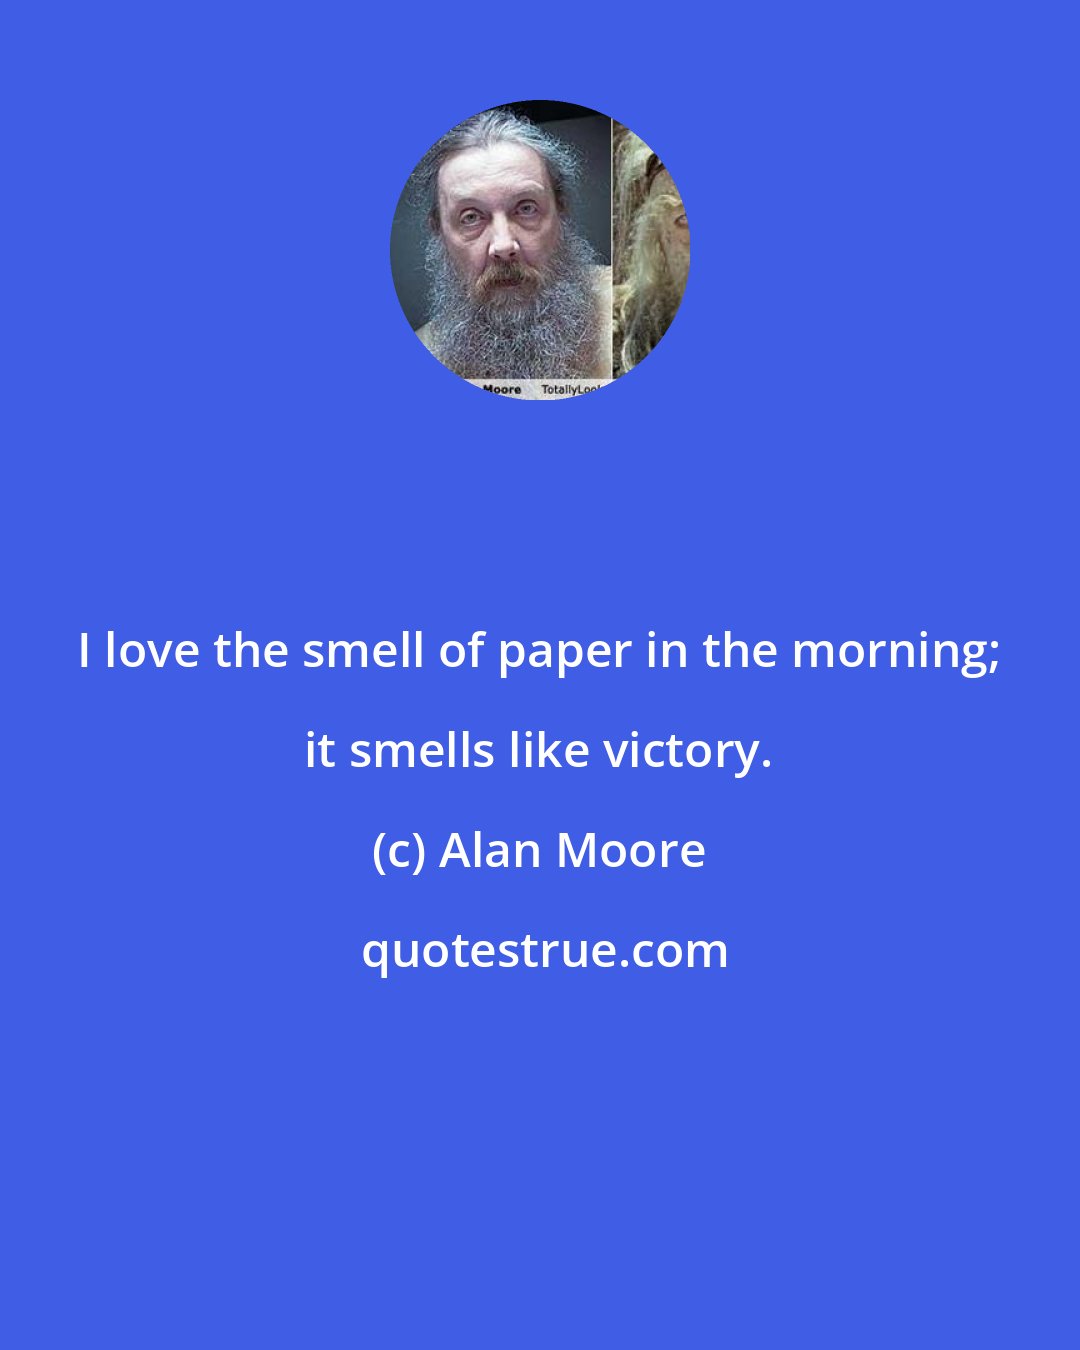 Alan Moore: I love the smell of paper in the morning; it smells like victory.